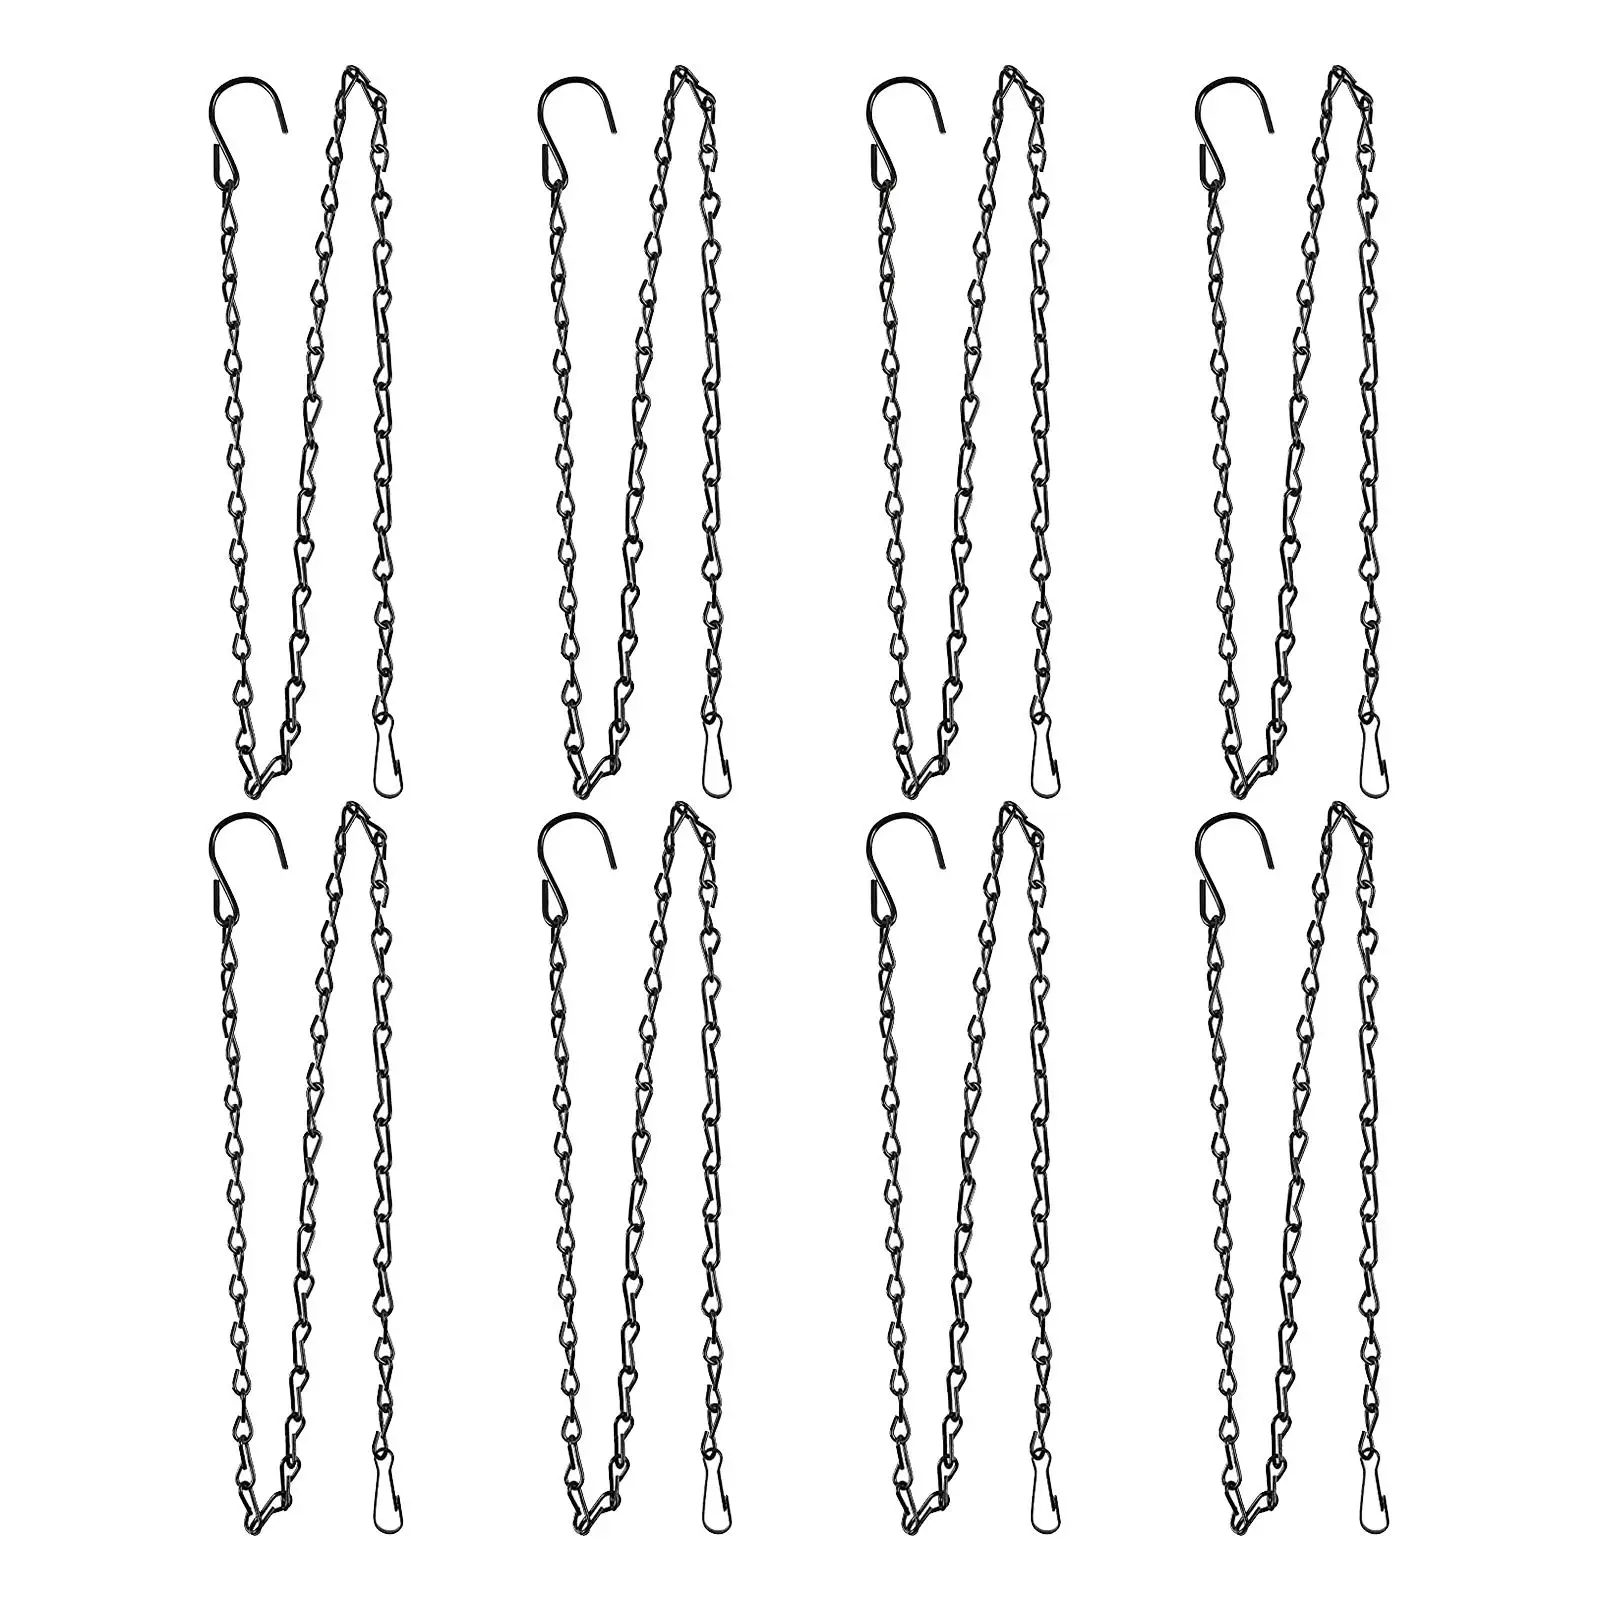 8 Hanging Chain 19.7inch Garden Plant Hangers with Clip & Hook, Easy to Install and Remove